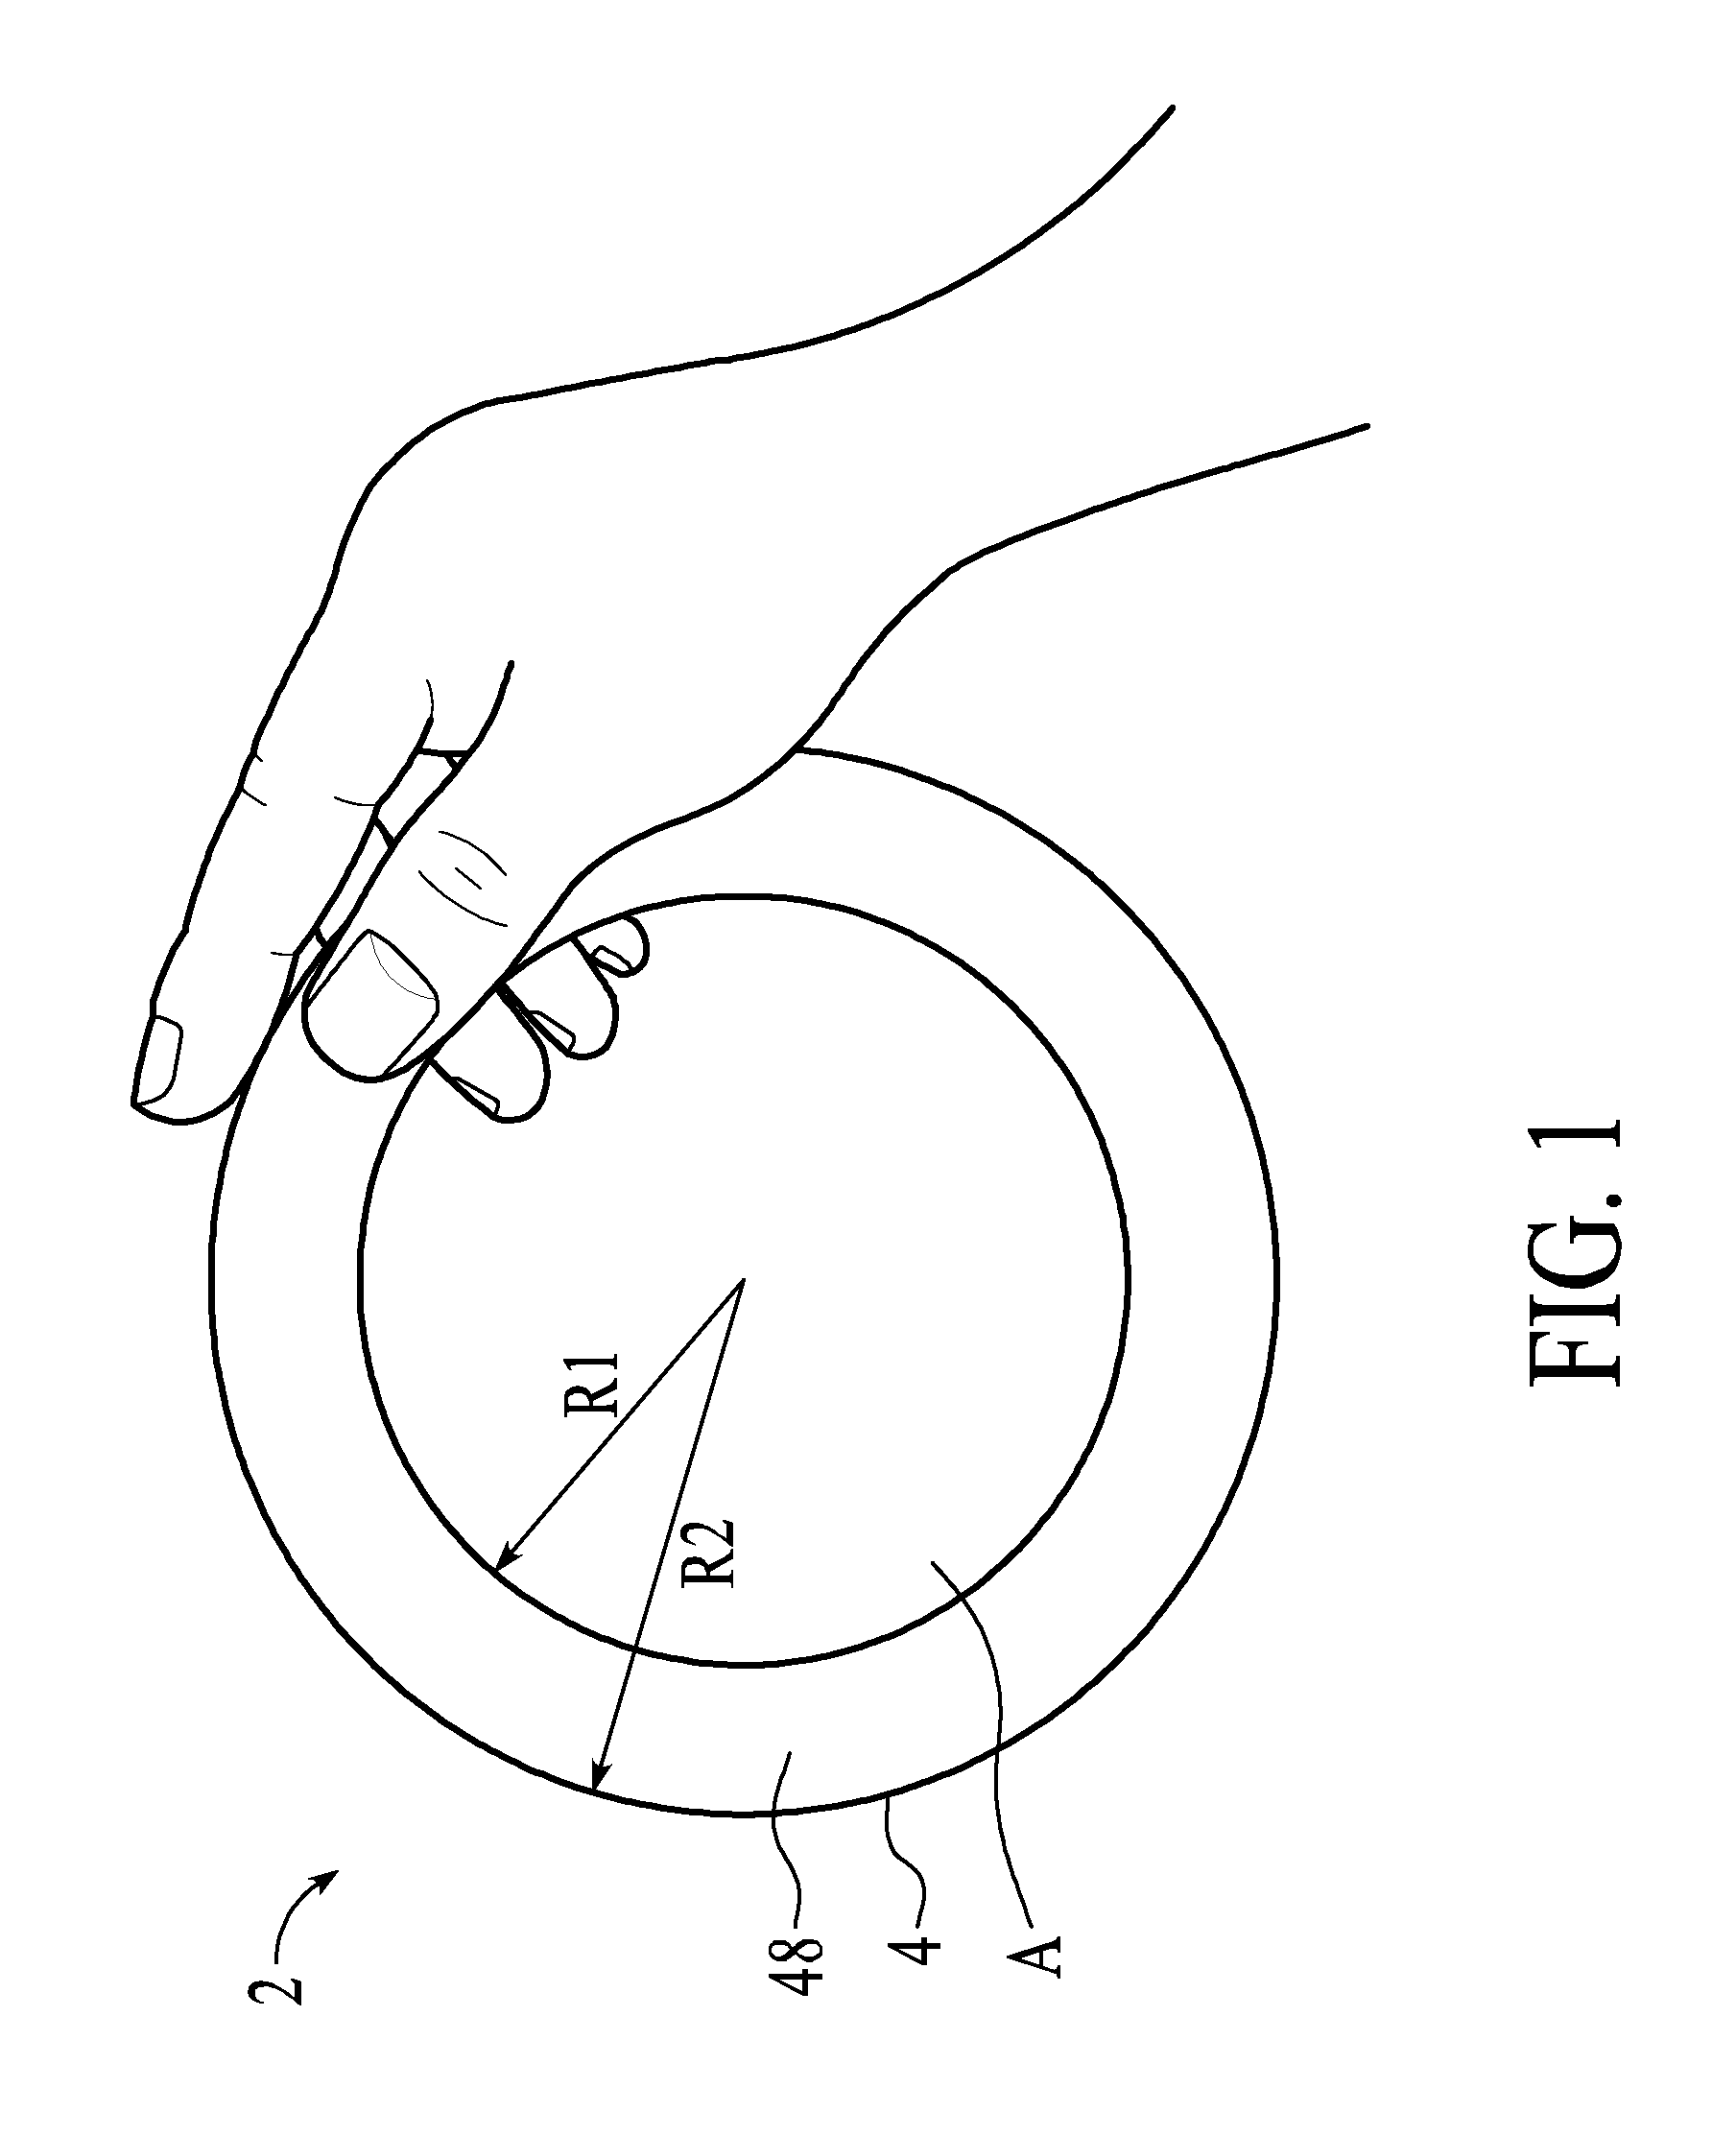 Method and system for magnetic toss gaming